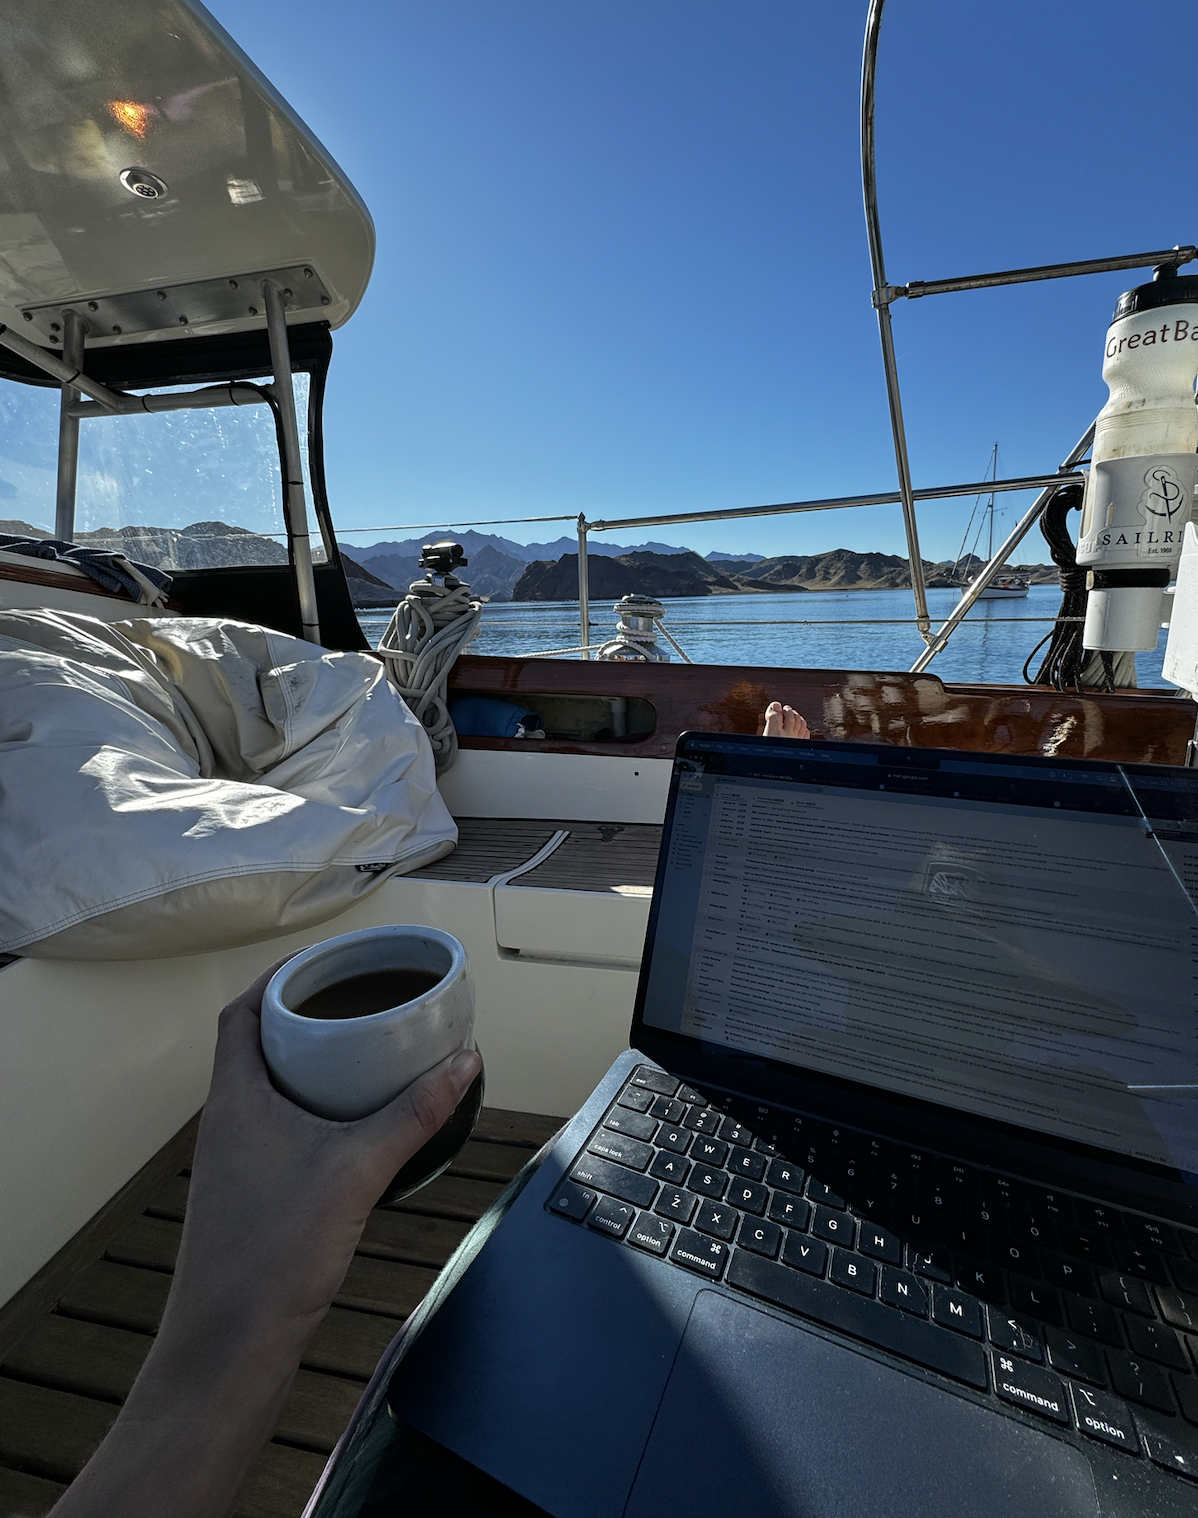 Remotely working on a sailboat